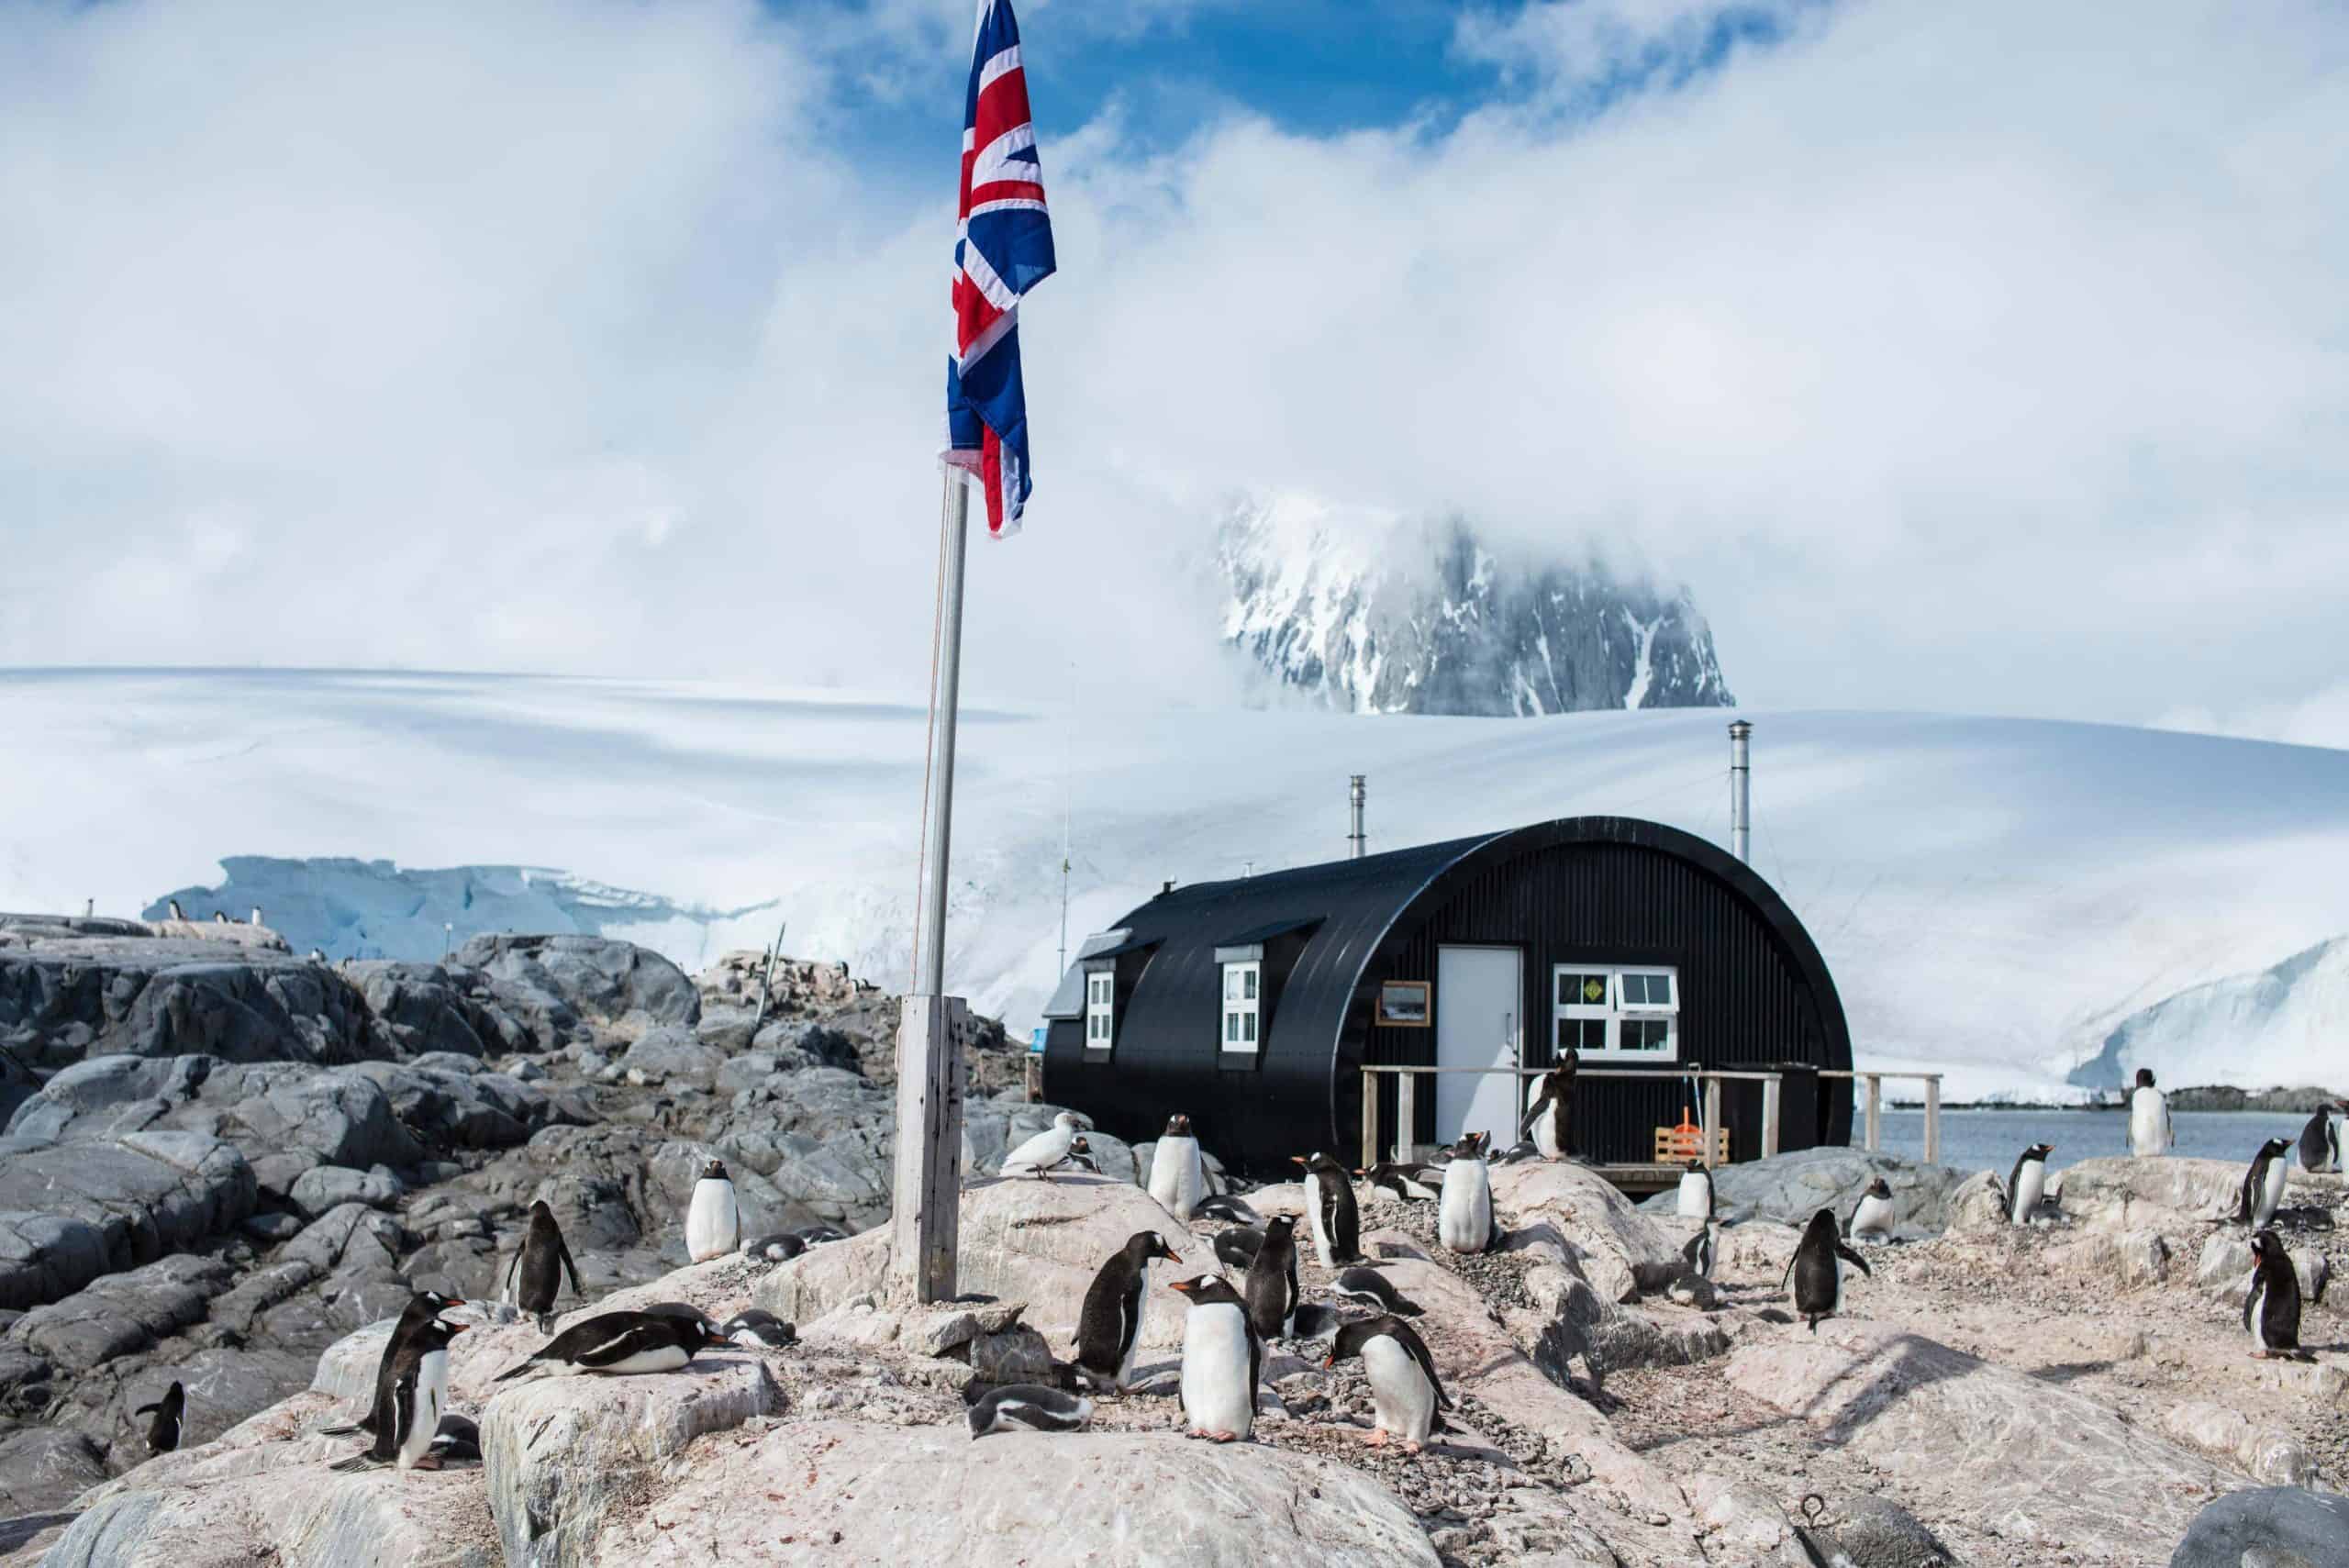 Workers wanted to watch penguins and run gift shop in Antarctica